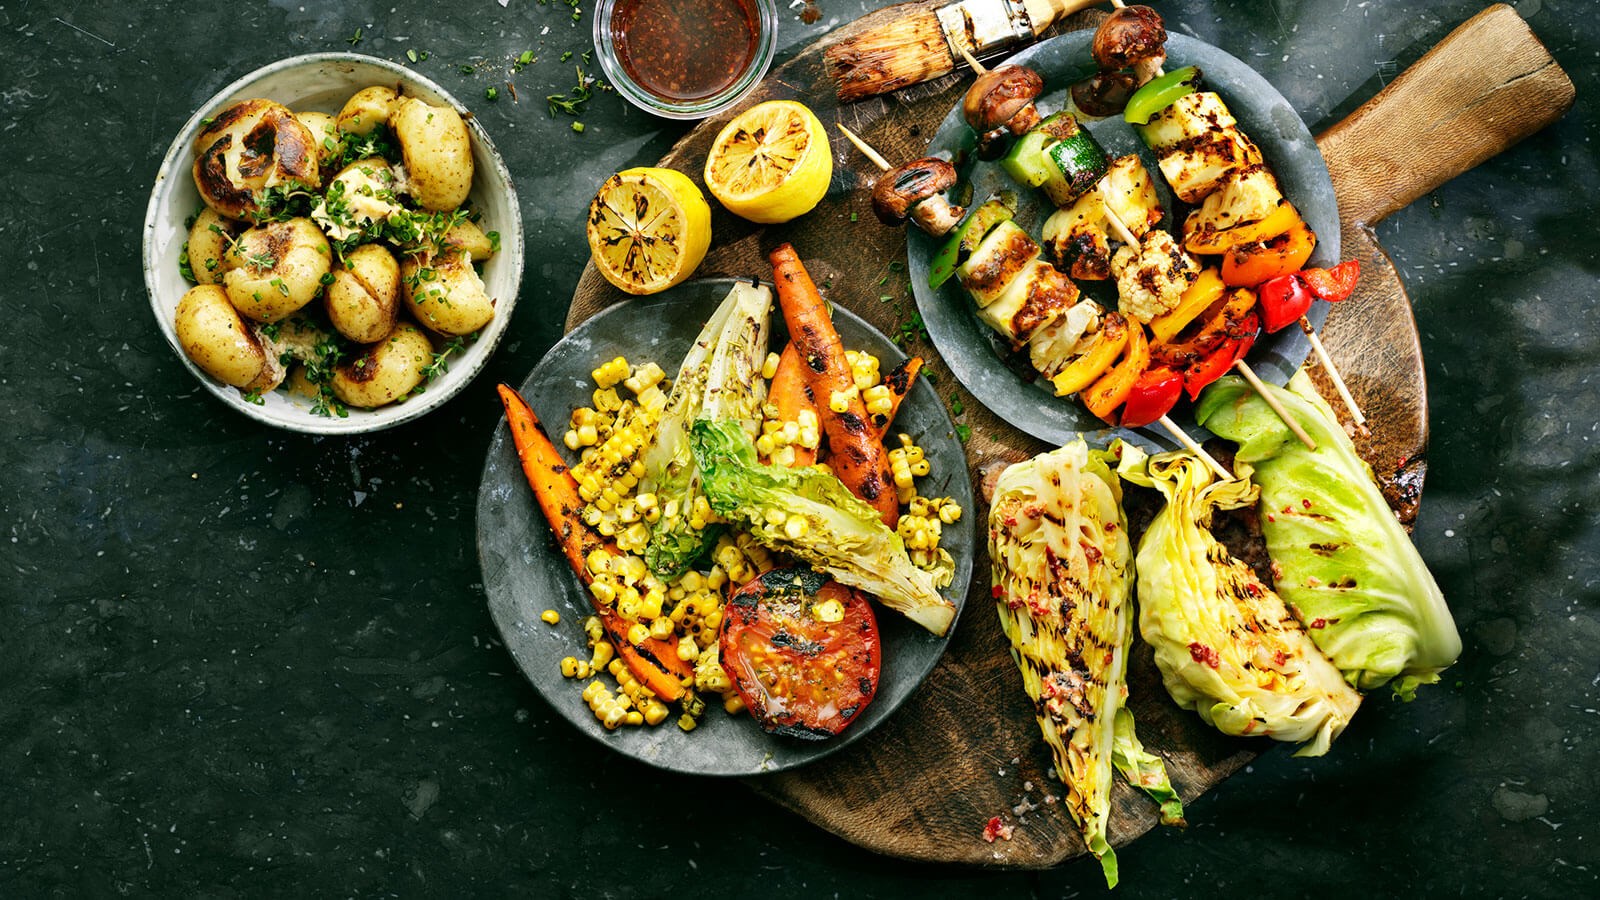 Four types of grilled sides - potatoes, veggies and kale